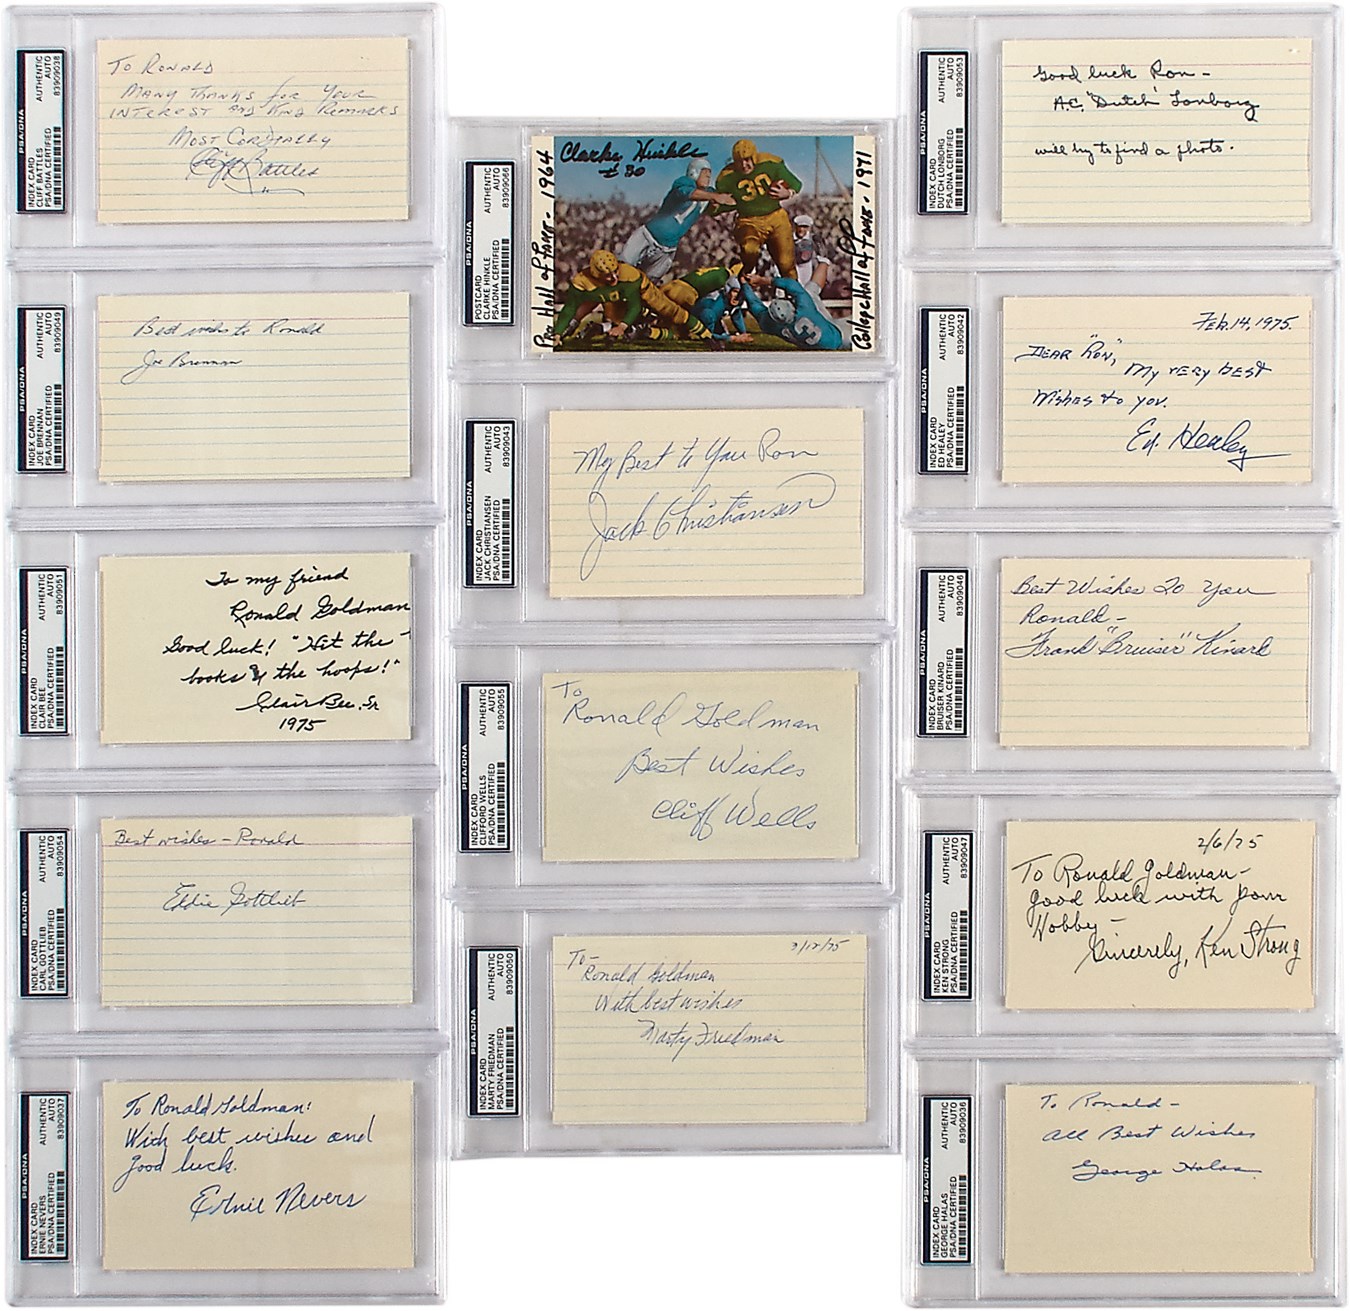 Football - Vintage Football & Basketball Autographed Index Cards with Ken Strong (PSA/DNA)